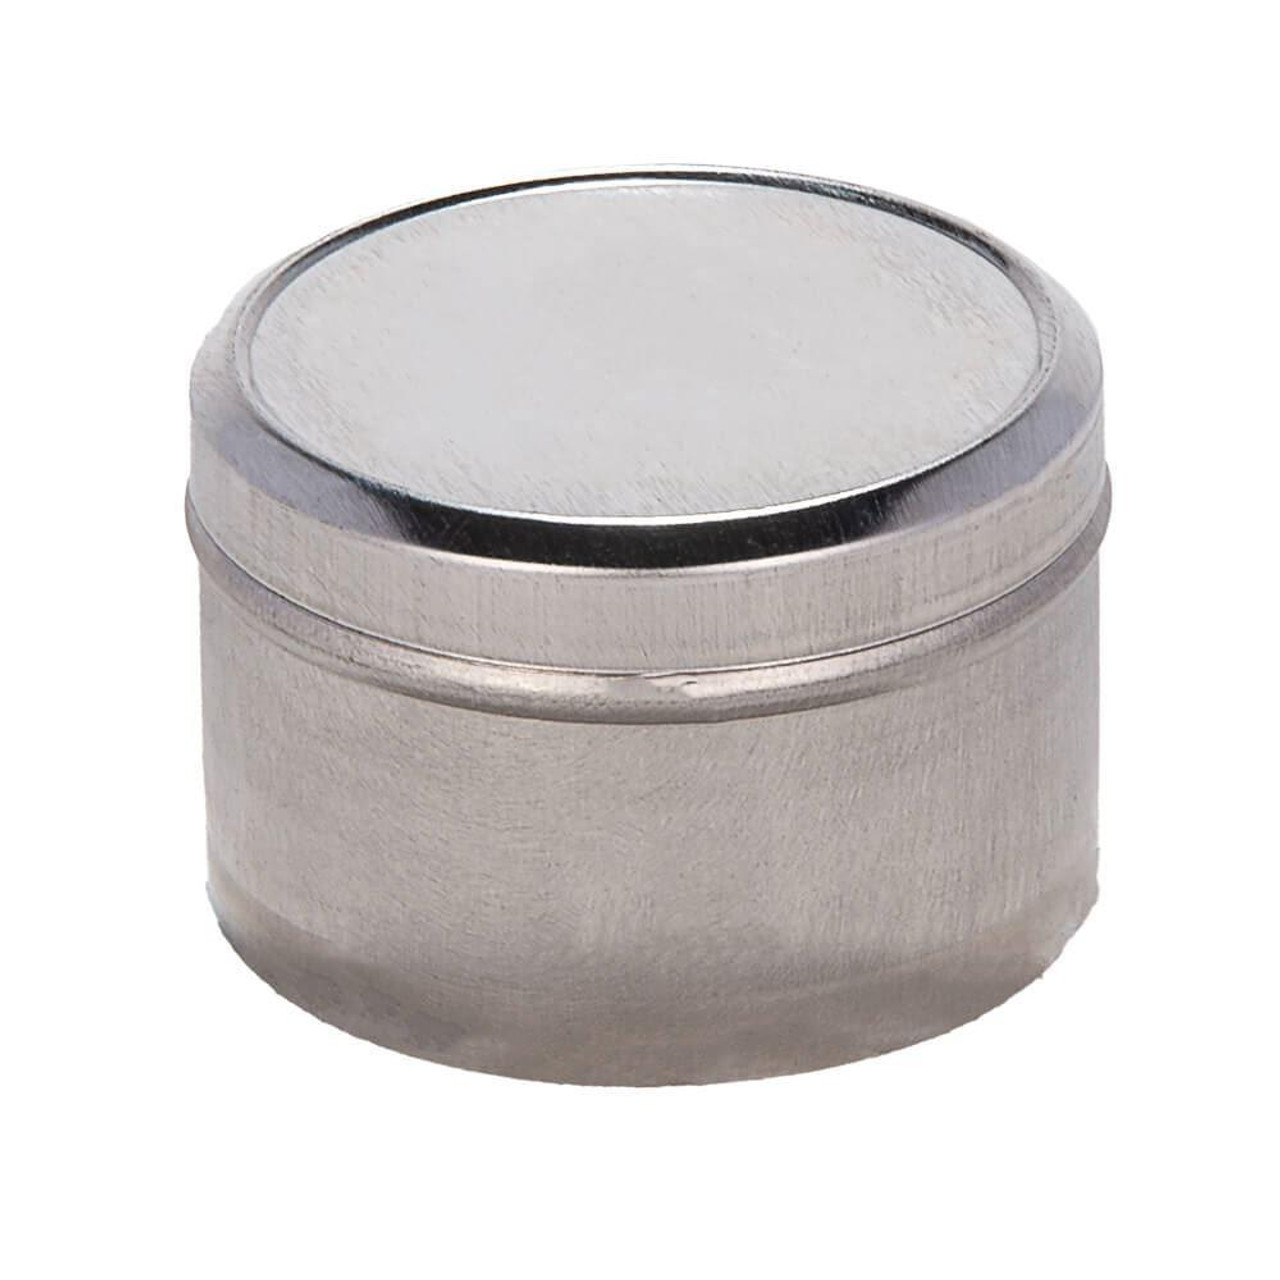 https://cdn11.bigcommerce.com/s-zgzol/images/stencil/1280x1280/products/9157/238566/gilson-company-sample-containers-tinned-metal-2oz-12pk__80584.1700978498.jpg?c=2